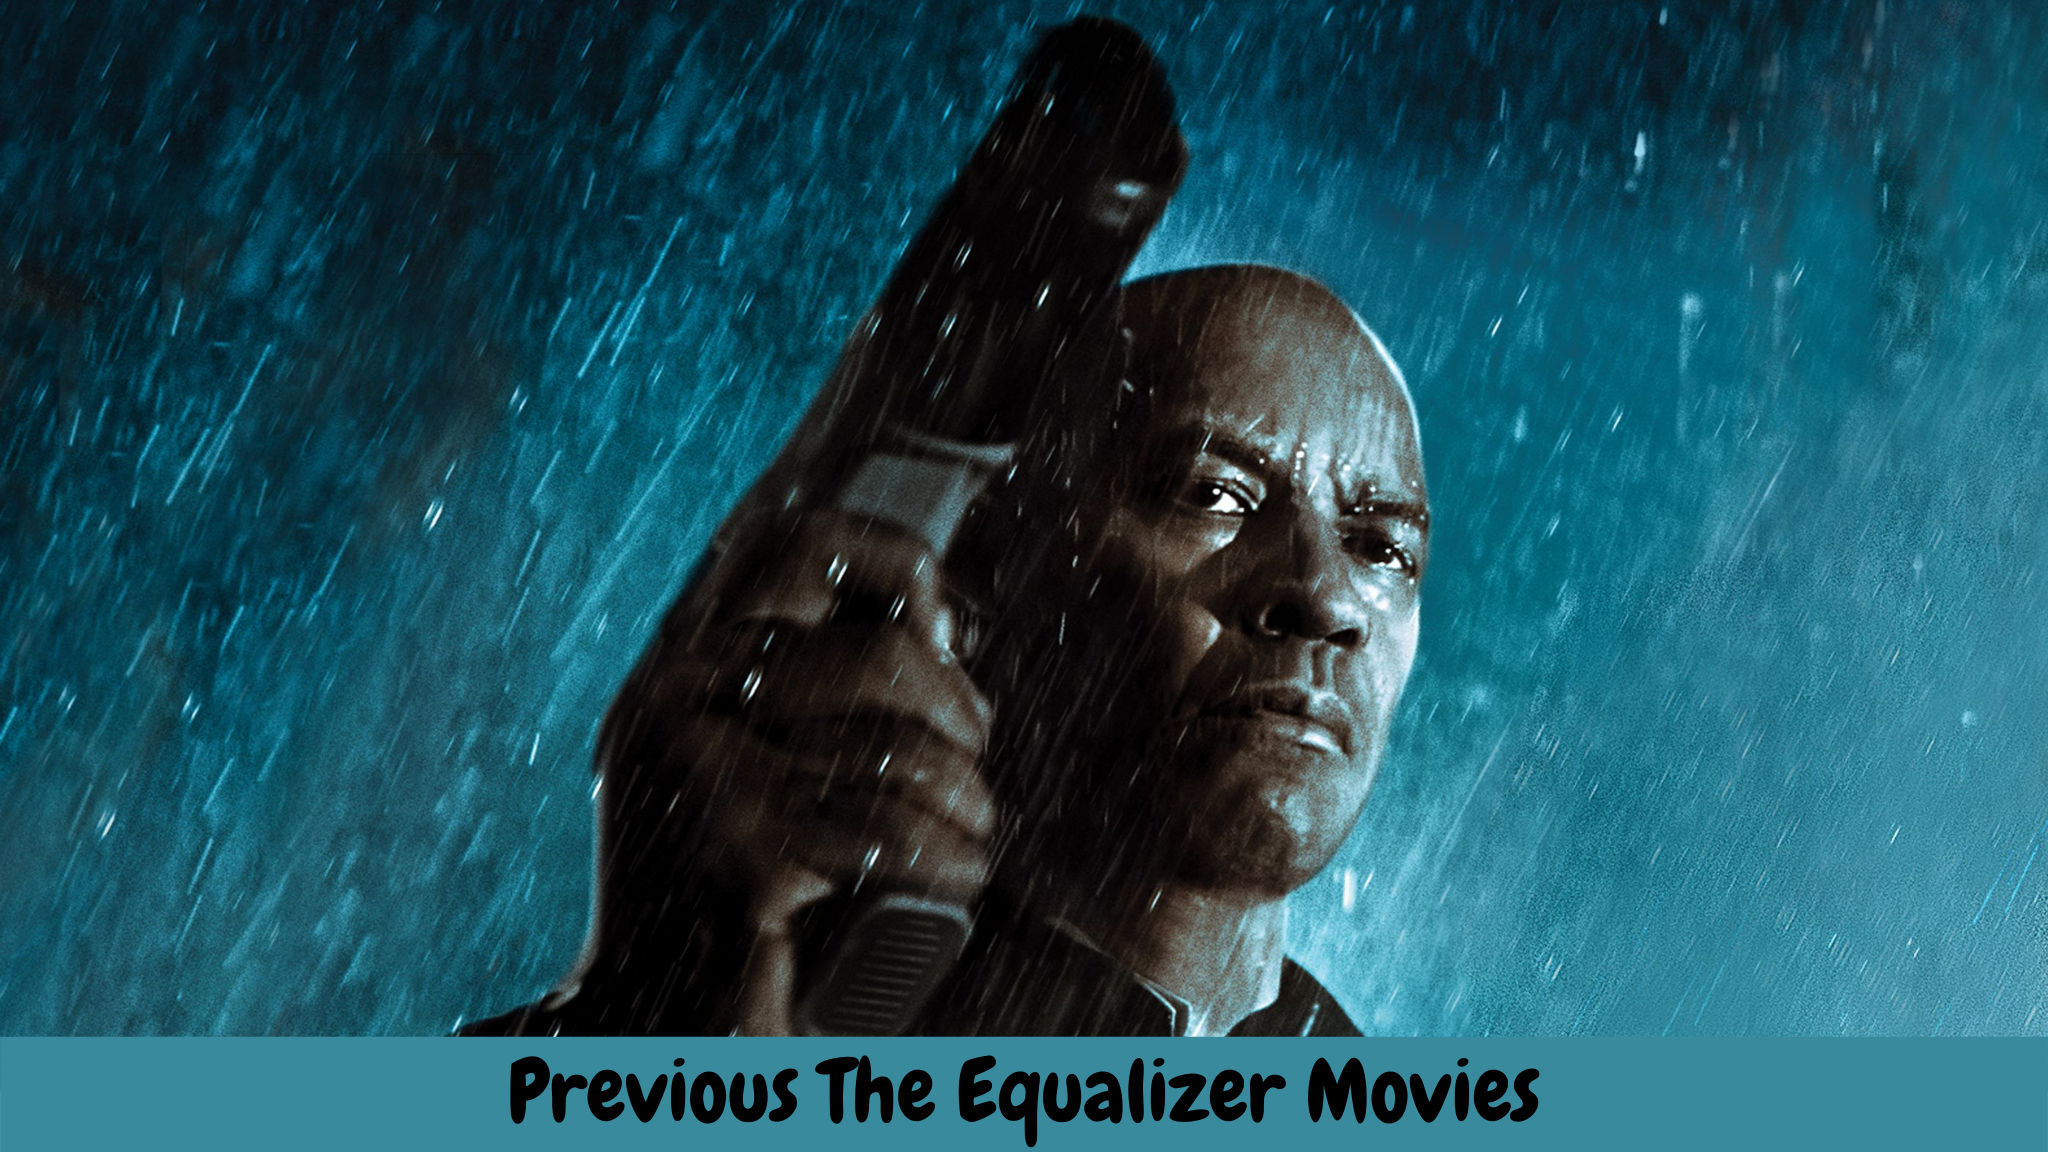 Previous The Equalizer Movies